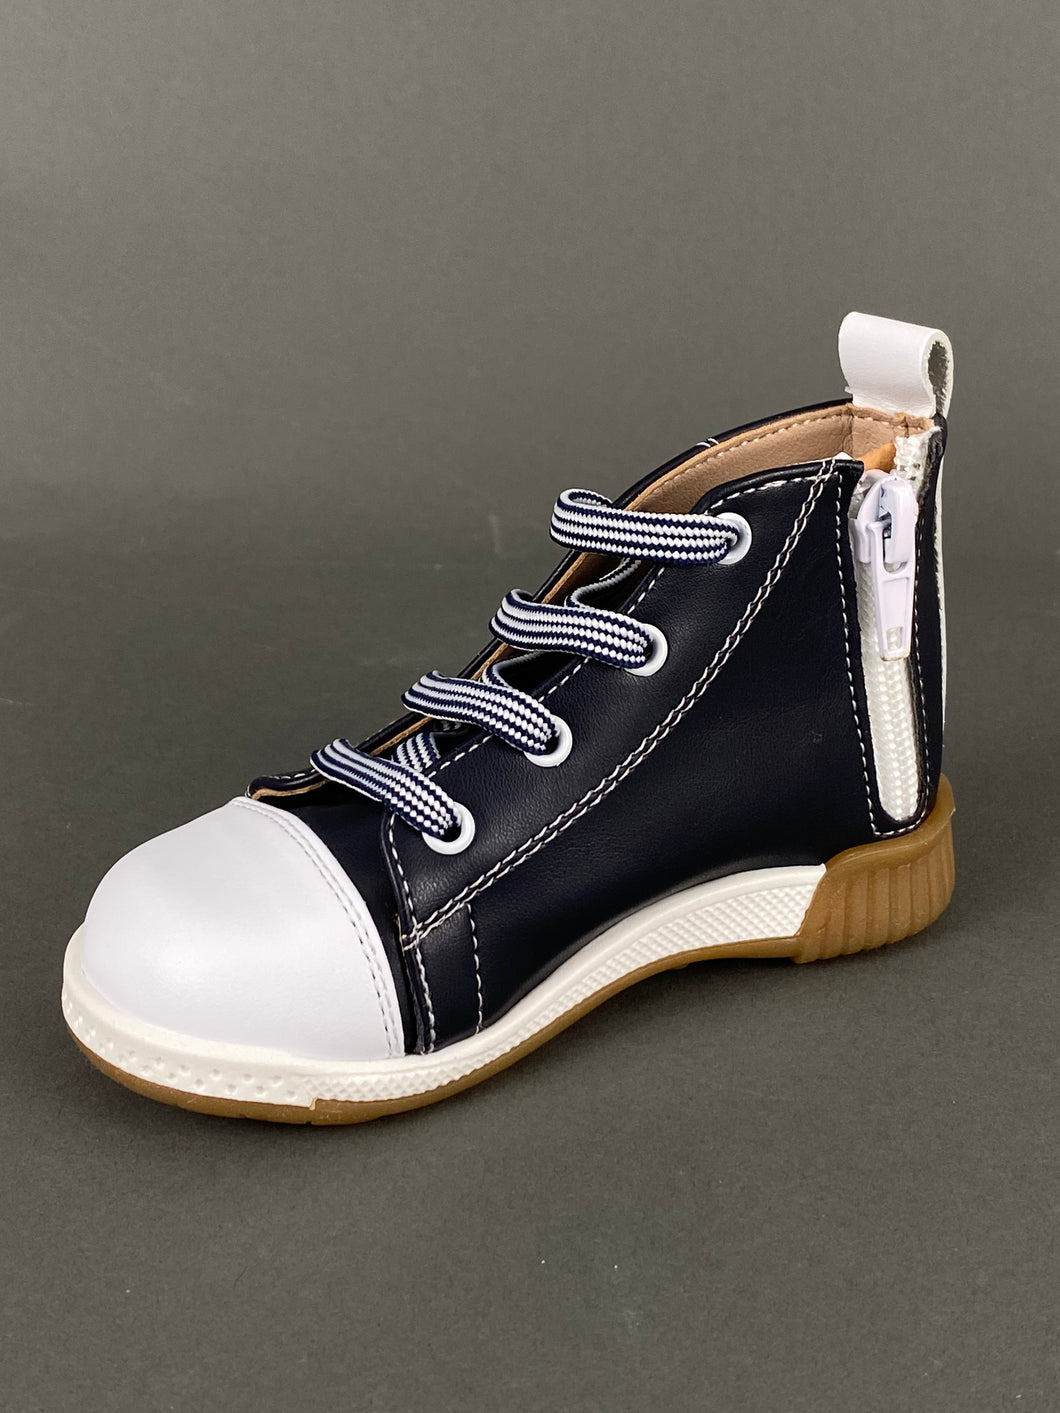 Gorgino Leather Navy Blue High Cut with Shoelaces and Zipper GH201732